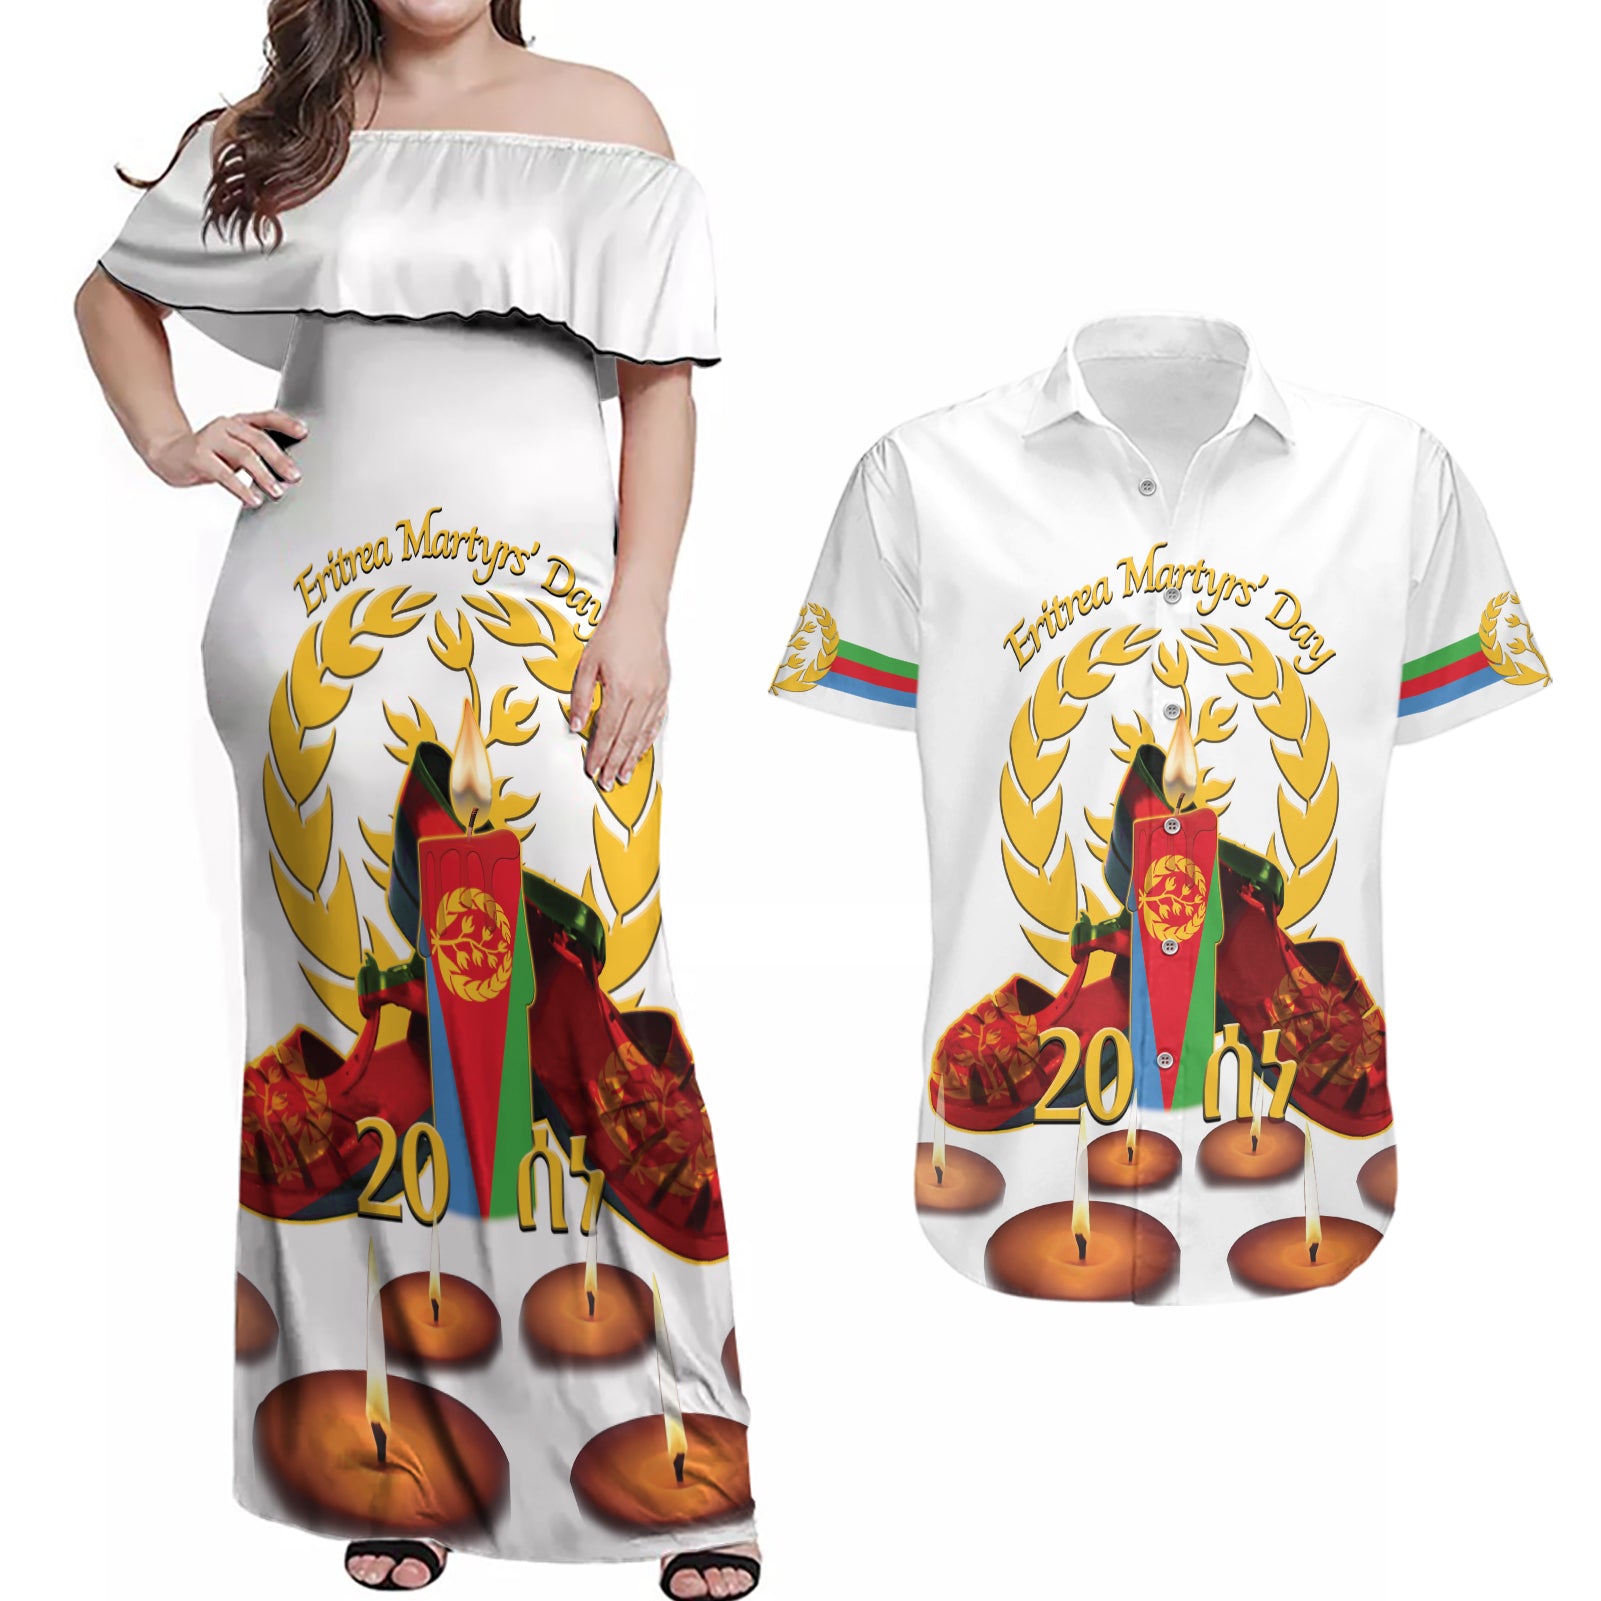 Custom Eritrea Martyrs' Day Couples Matching Off Shoulder Maxi Dress and Hawaiian Shirt 20 June Shida Shoes With Candles - White